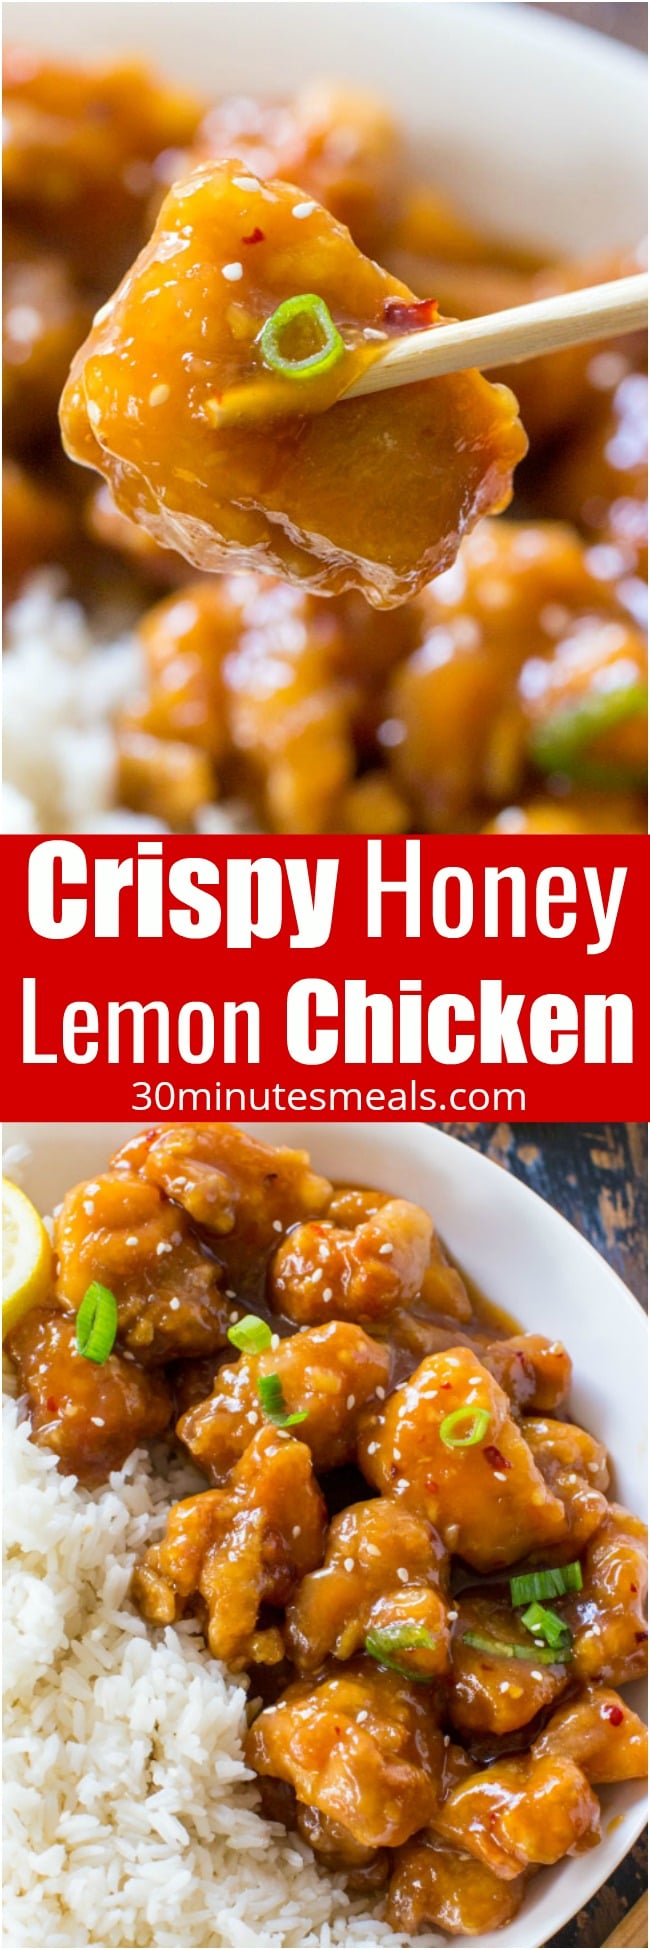 Crispy Honey Lemon Chicken is a restaurant quality meal, made easy at home in just 30 minutes in one pan! Crispy, sticky and full of honey lemon flavor.